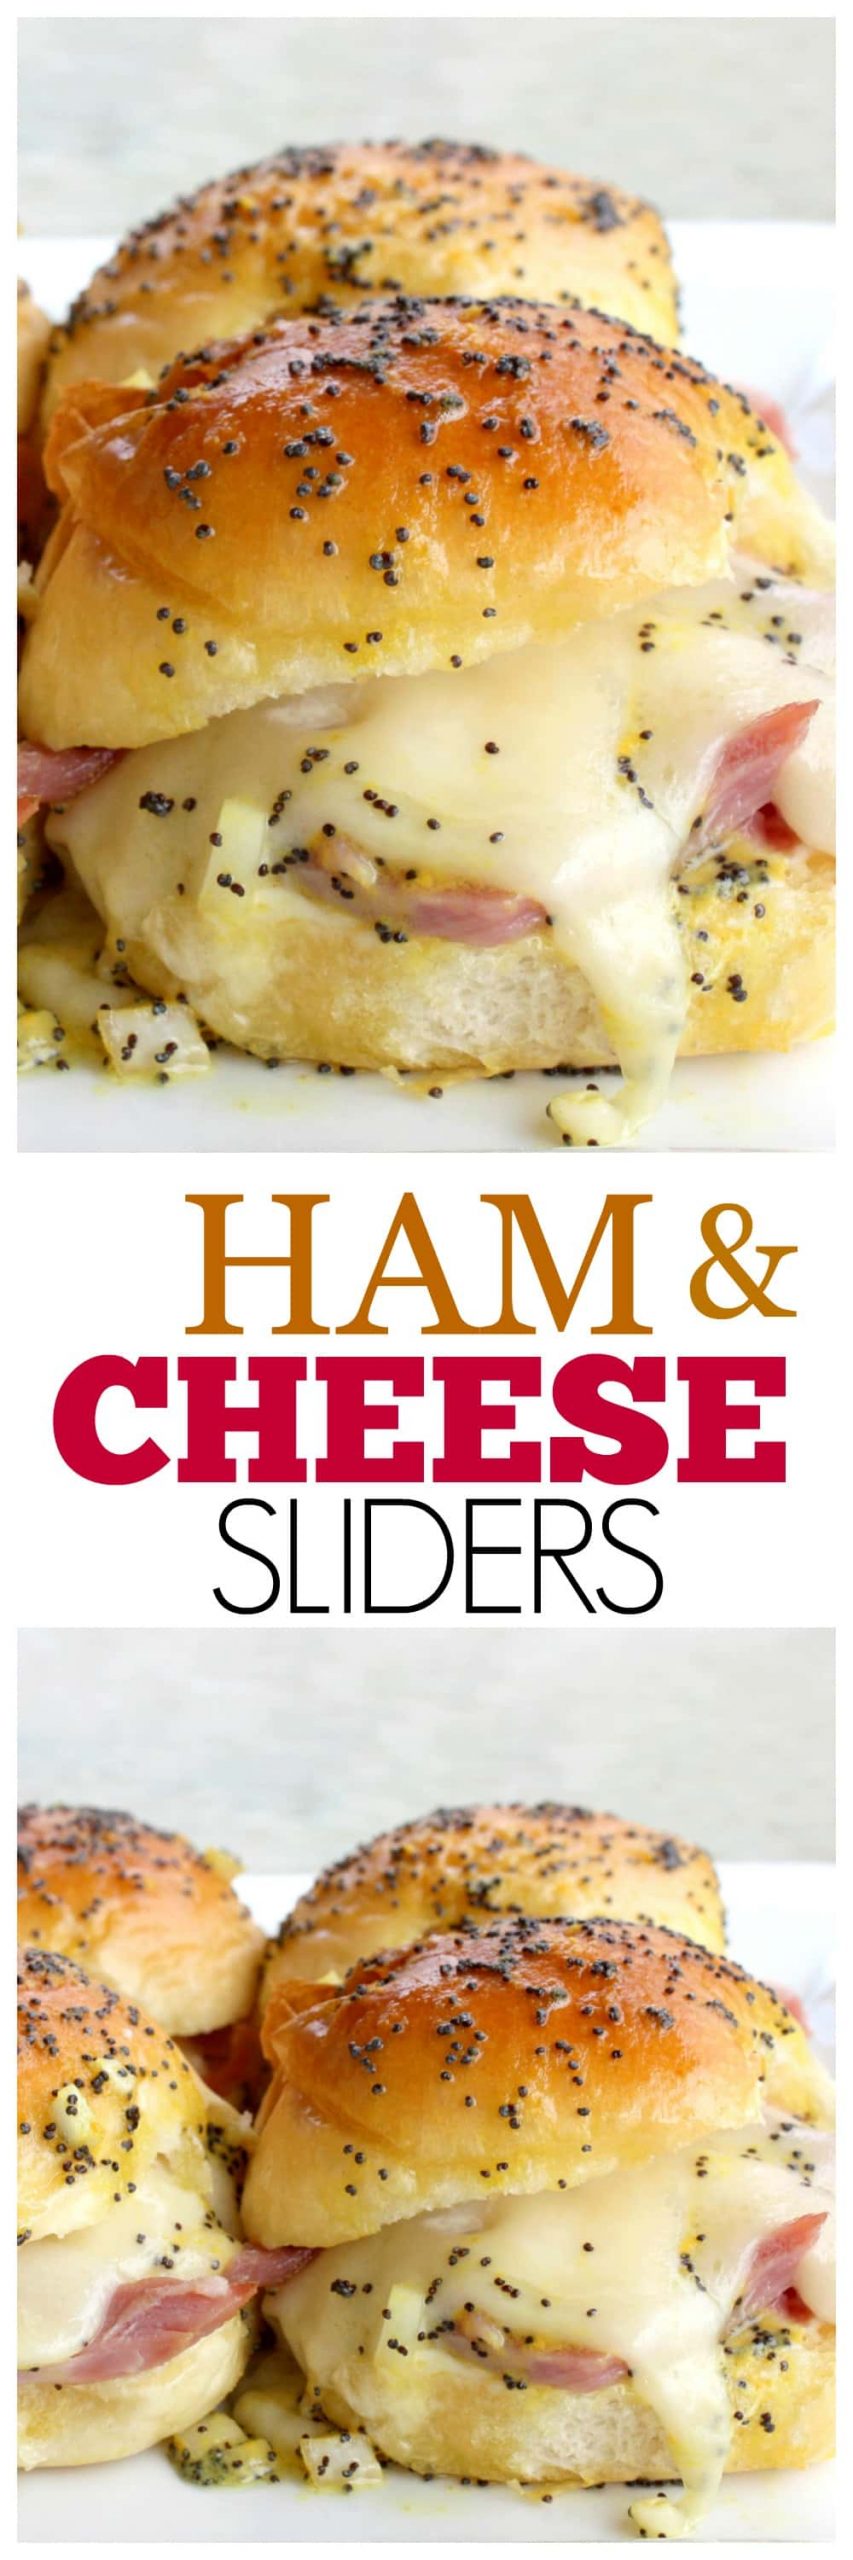 fb image scaled - Ham and Cheese Sliders